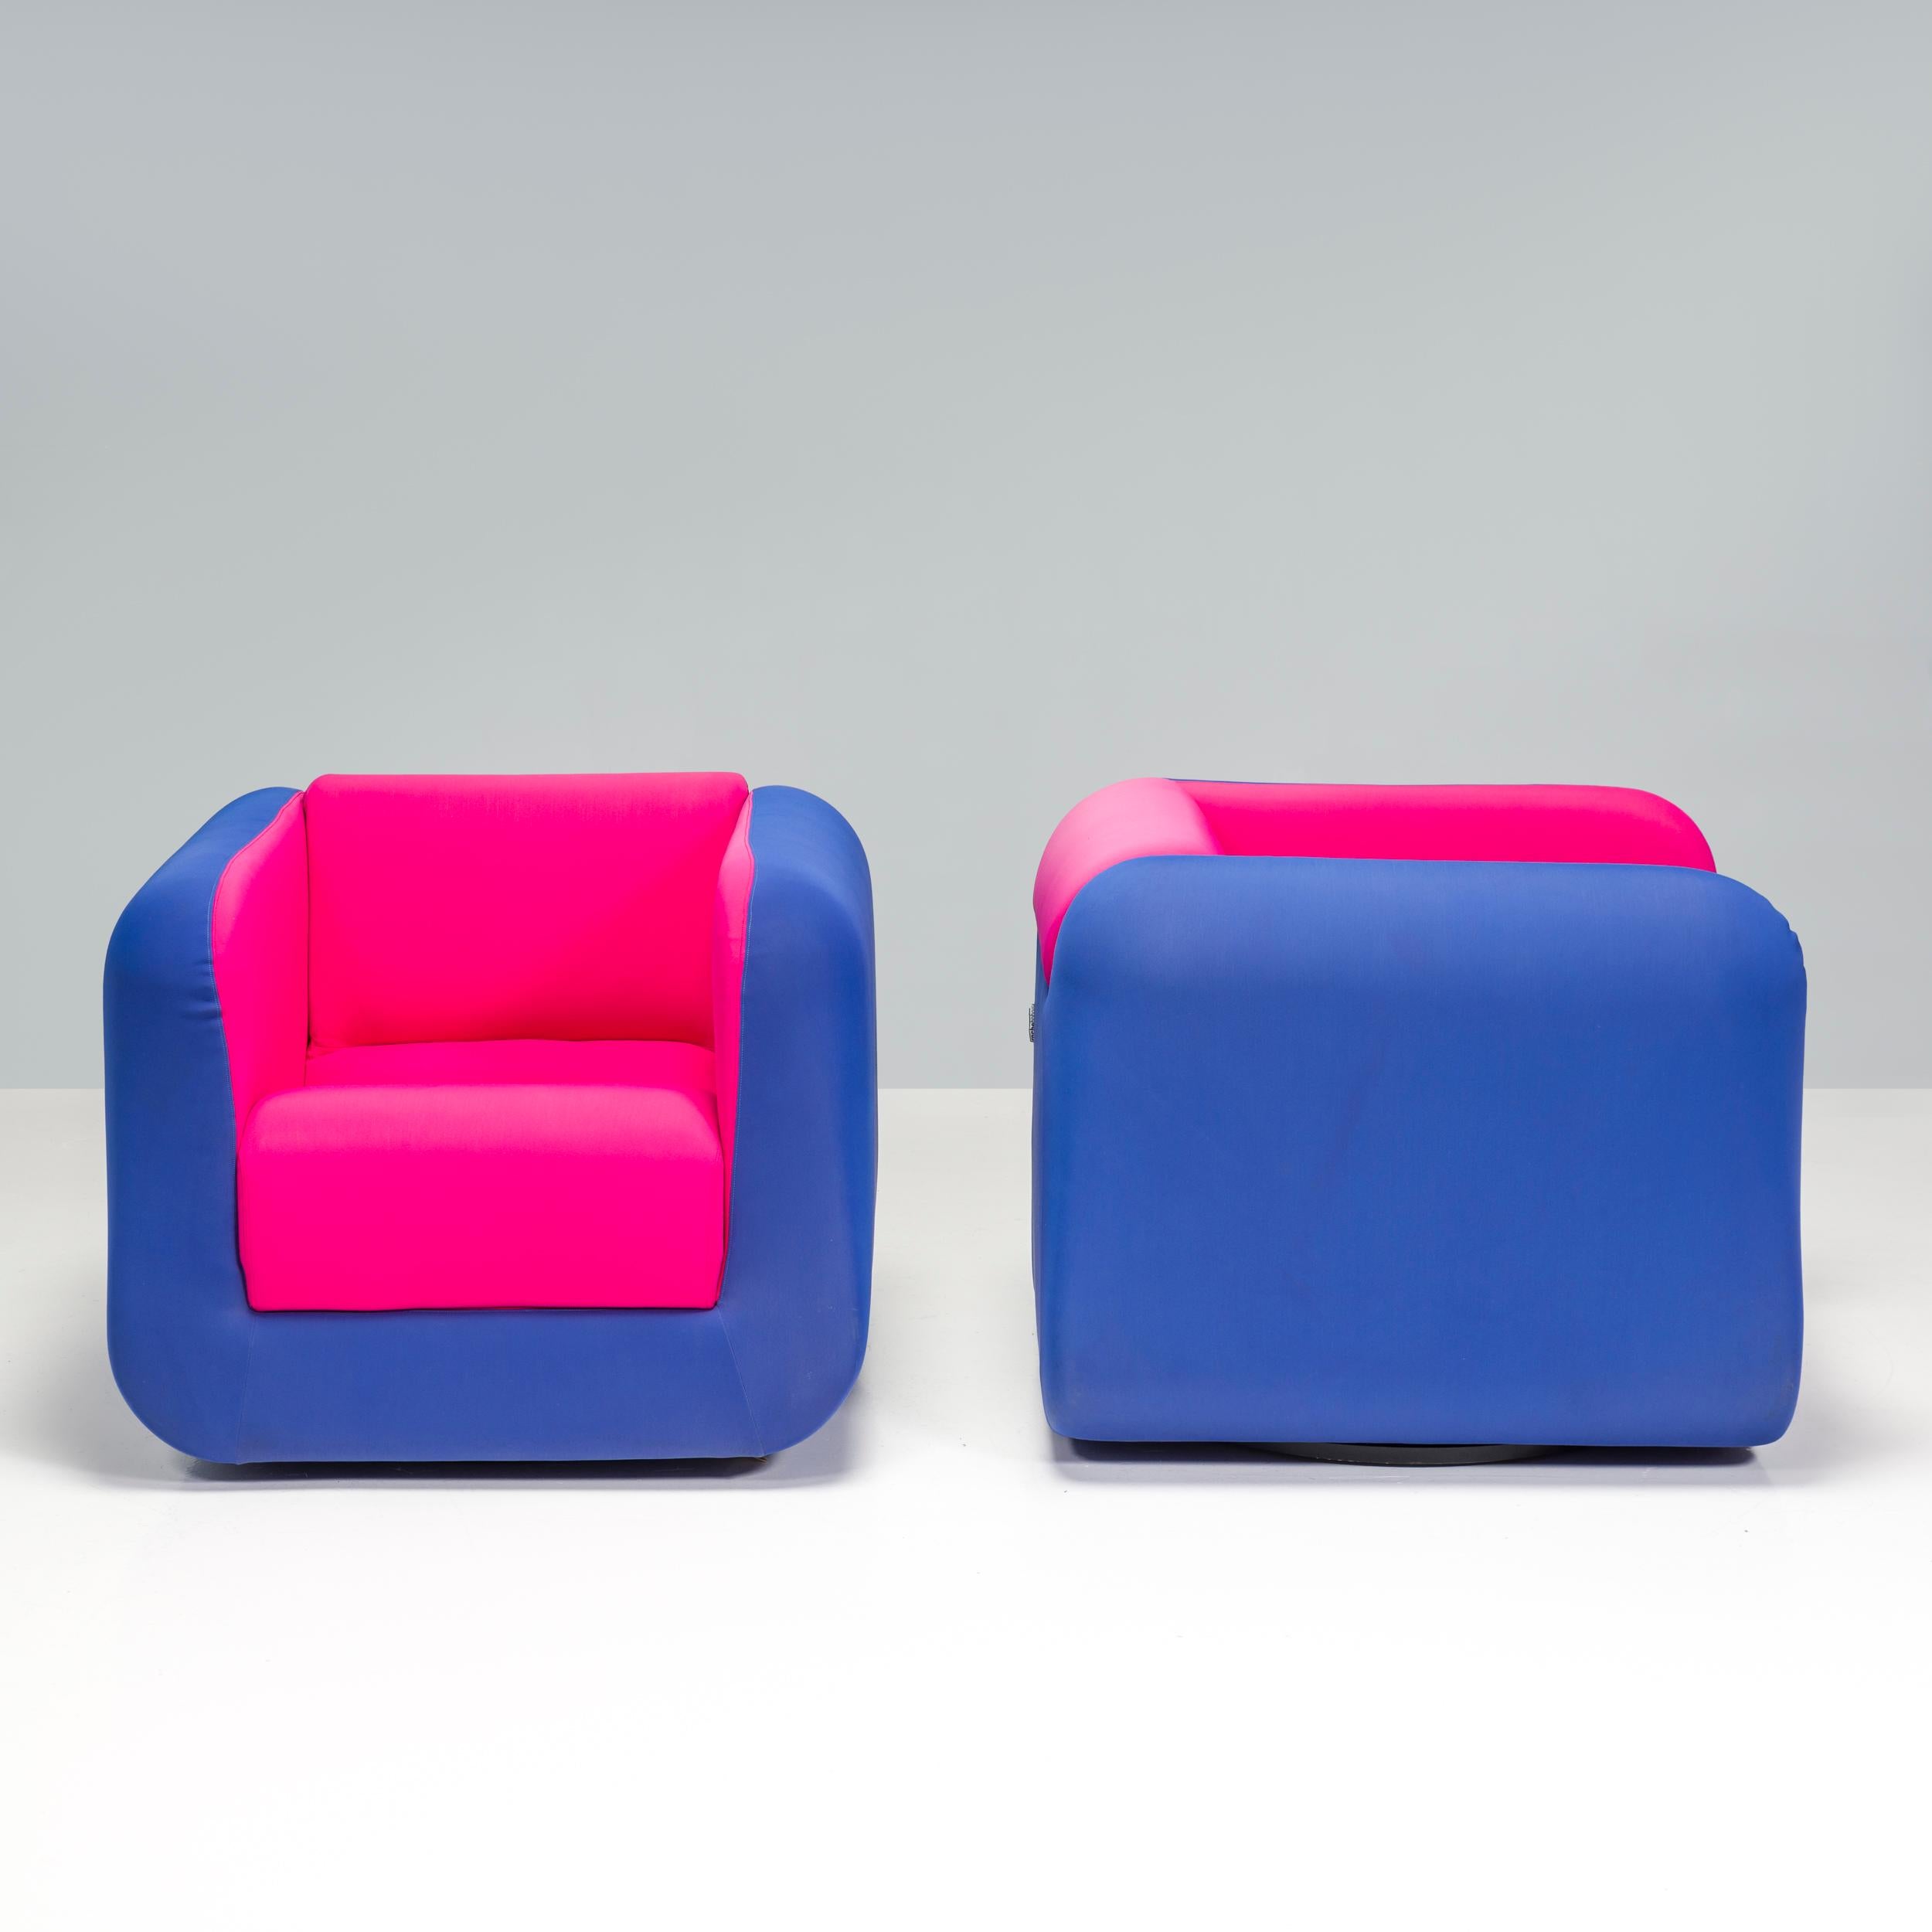 Designed and manufactured by Roche Bobois, this set of armchairs have a 1960s pop art aesthetic.

The armchairs have a square silhouette with softly rounded corners with the arms and backrest creating a cocoon-like effect.

The outside faces of the